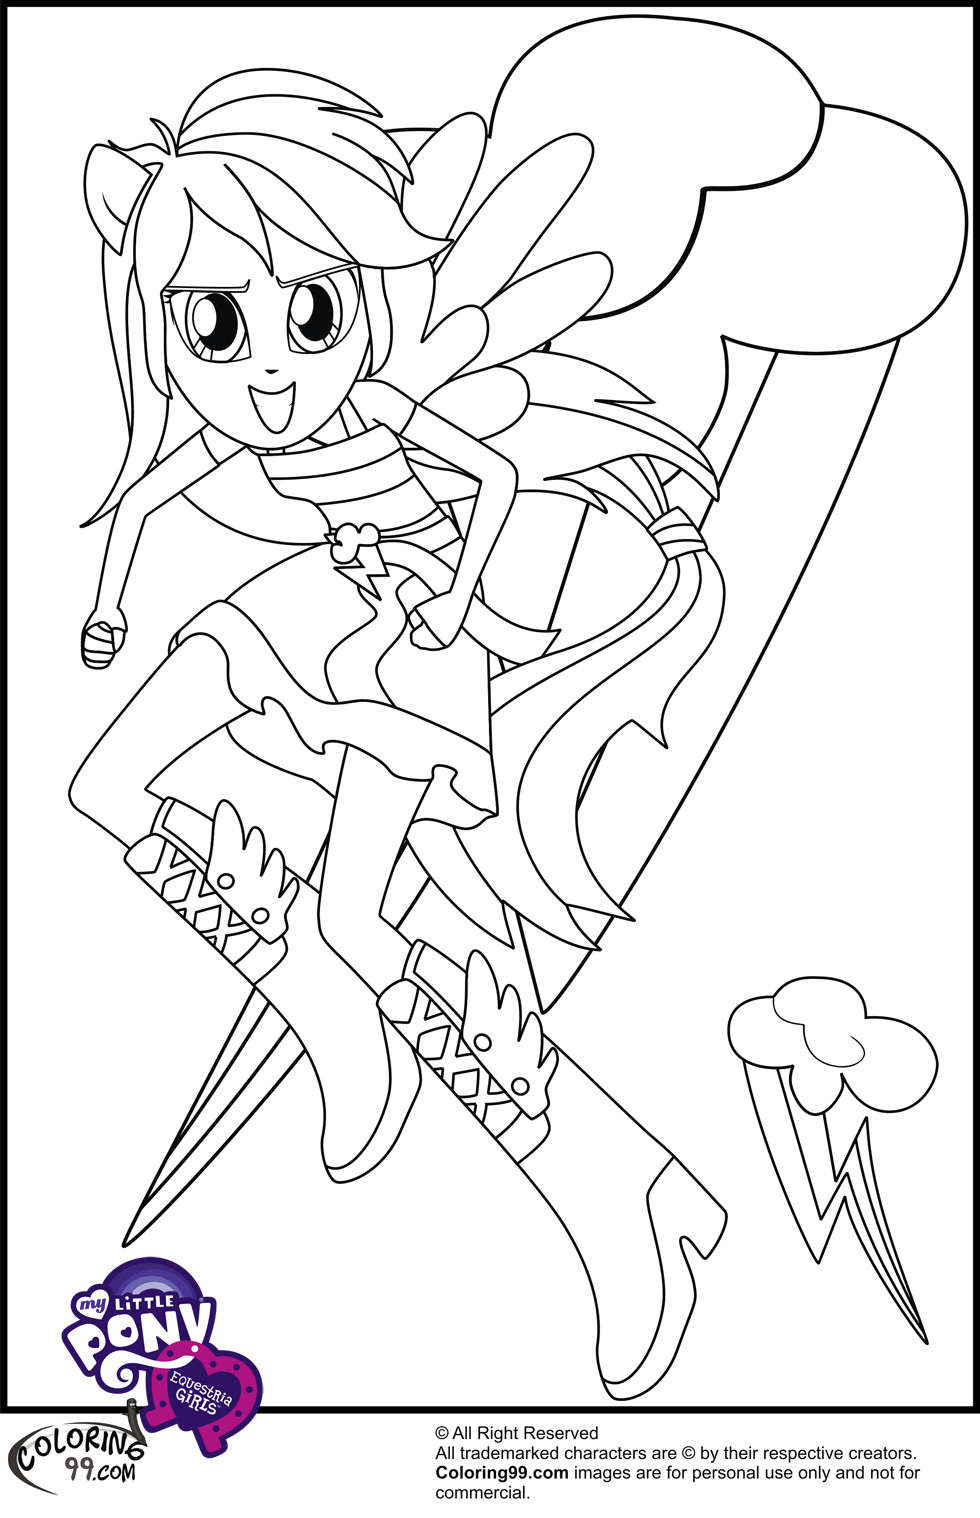 Equestria Girls Rainbow Rocks Coloring Pages
 My Little Pony Equestria Girls Coloring Pages